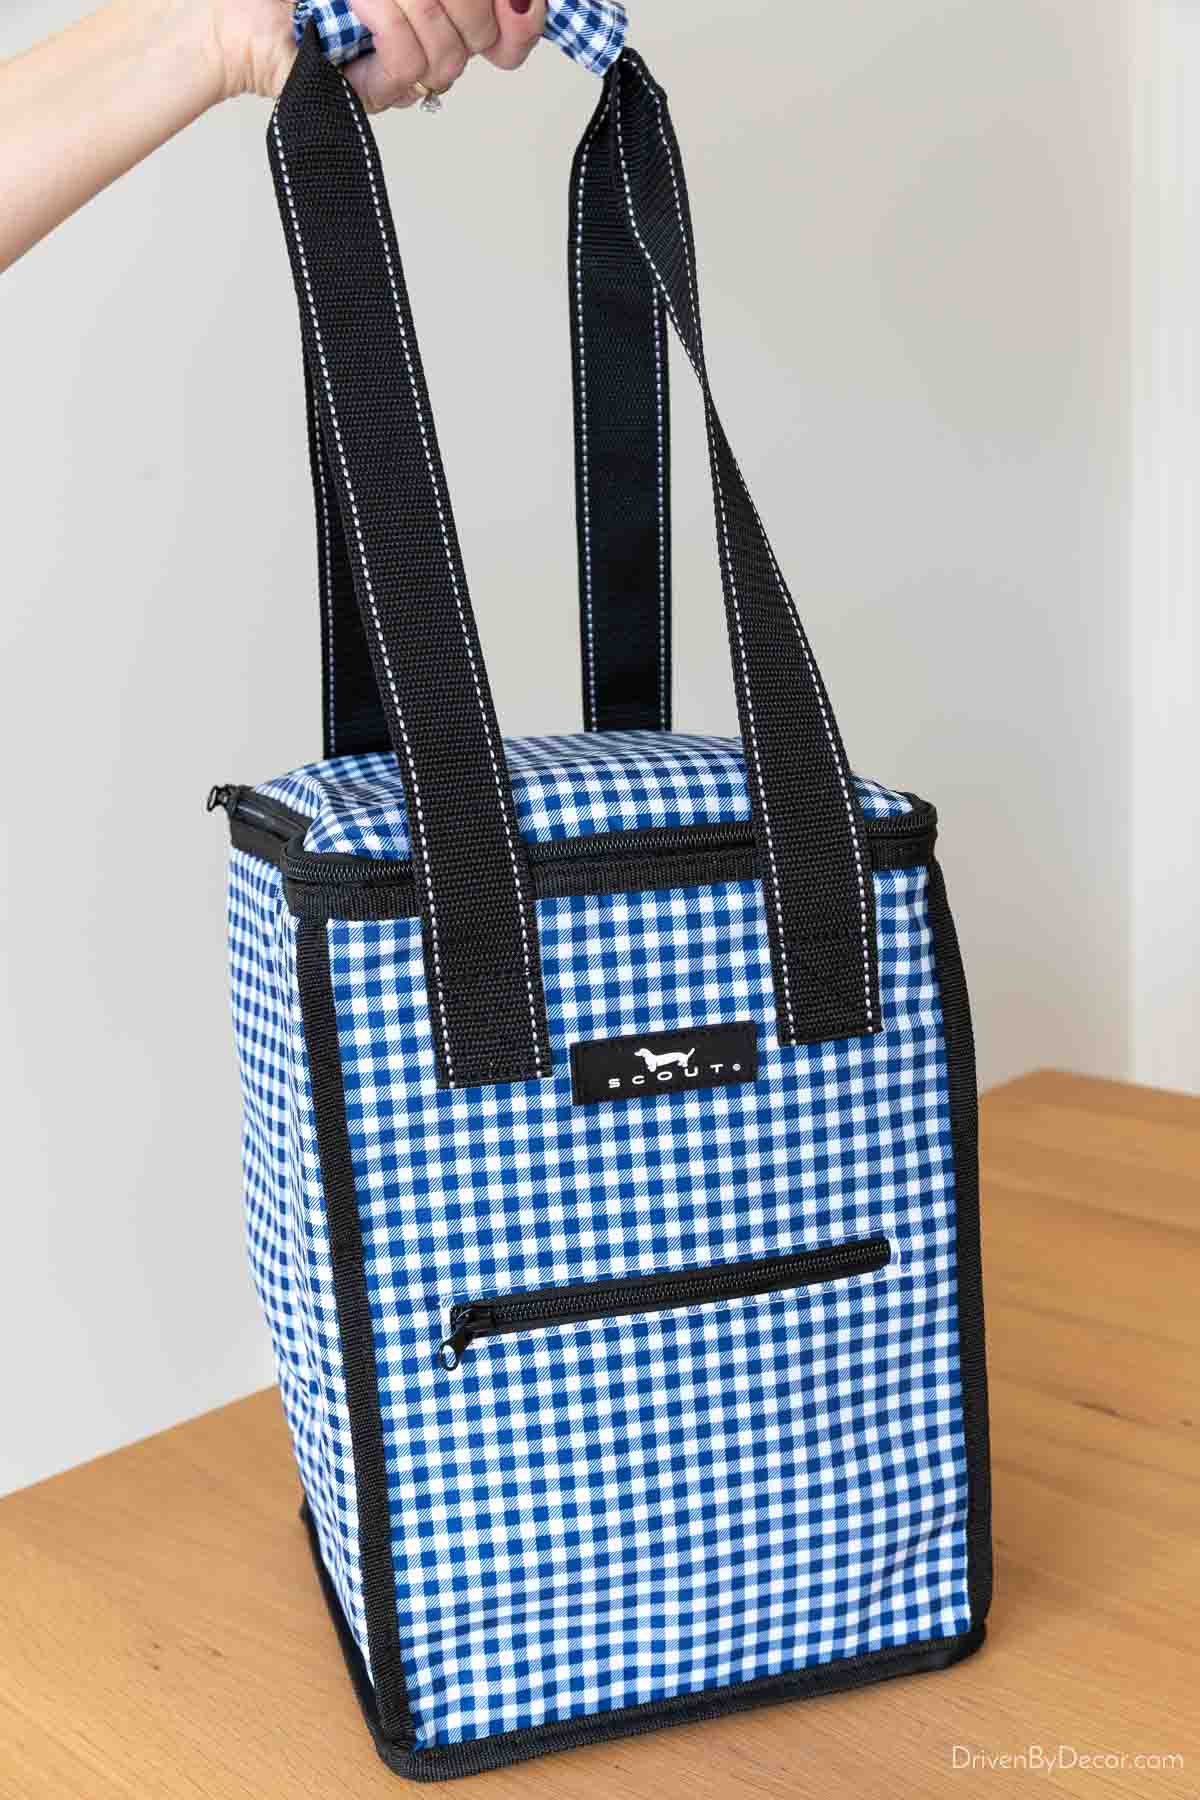 Scout soft cooler in blue gingham - makes a great gift!